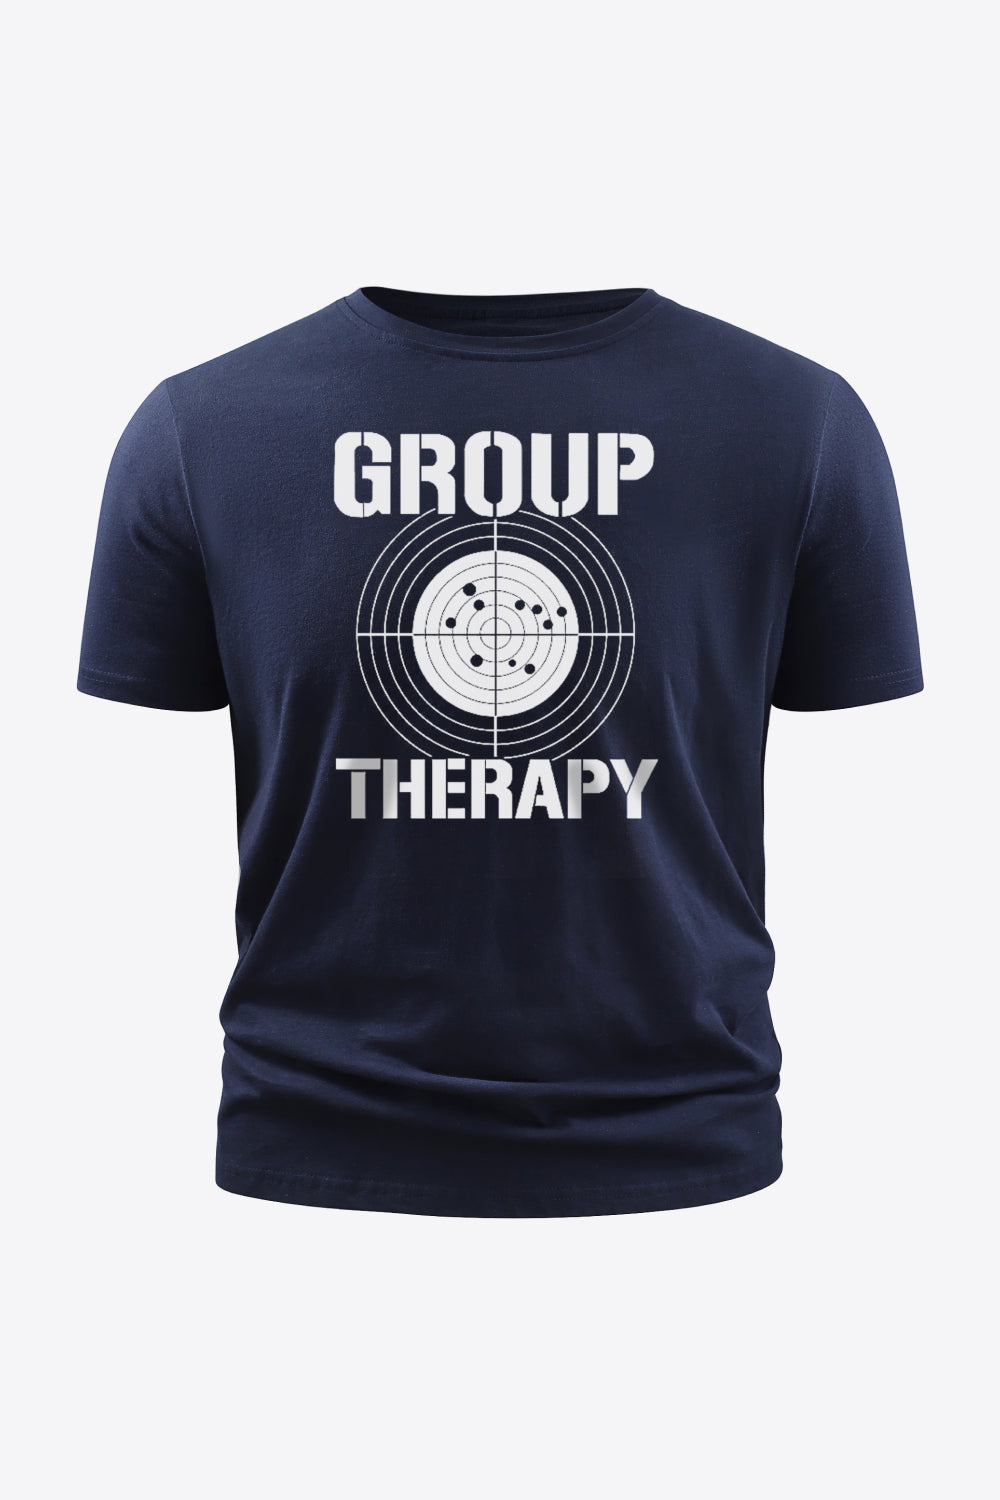 GROUP THERAPY Graphic Tee Shirt